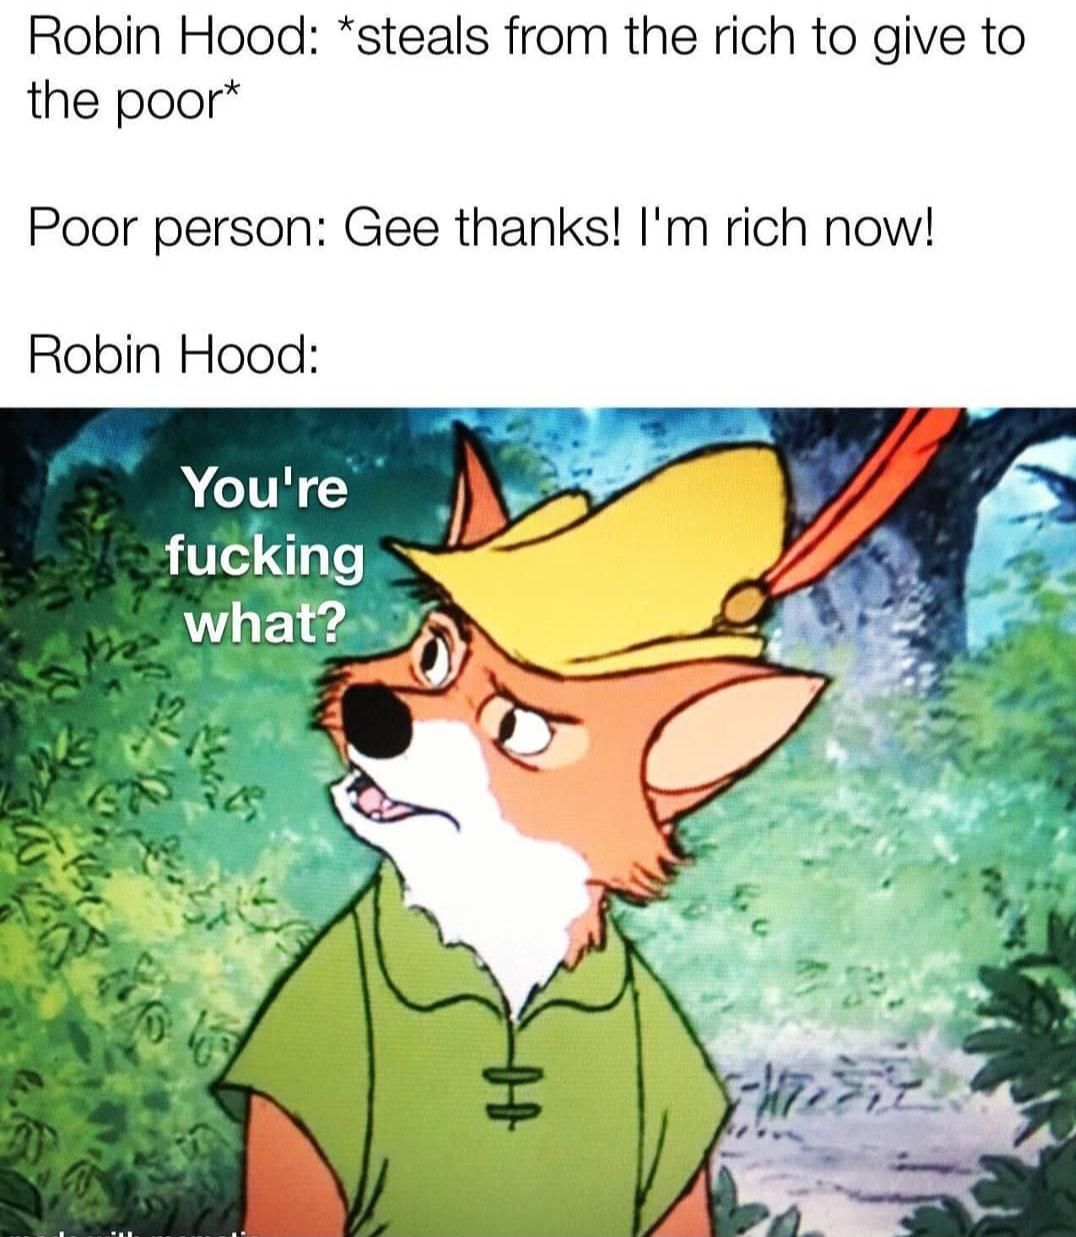 Robin Hood must have a stressed out career